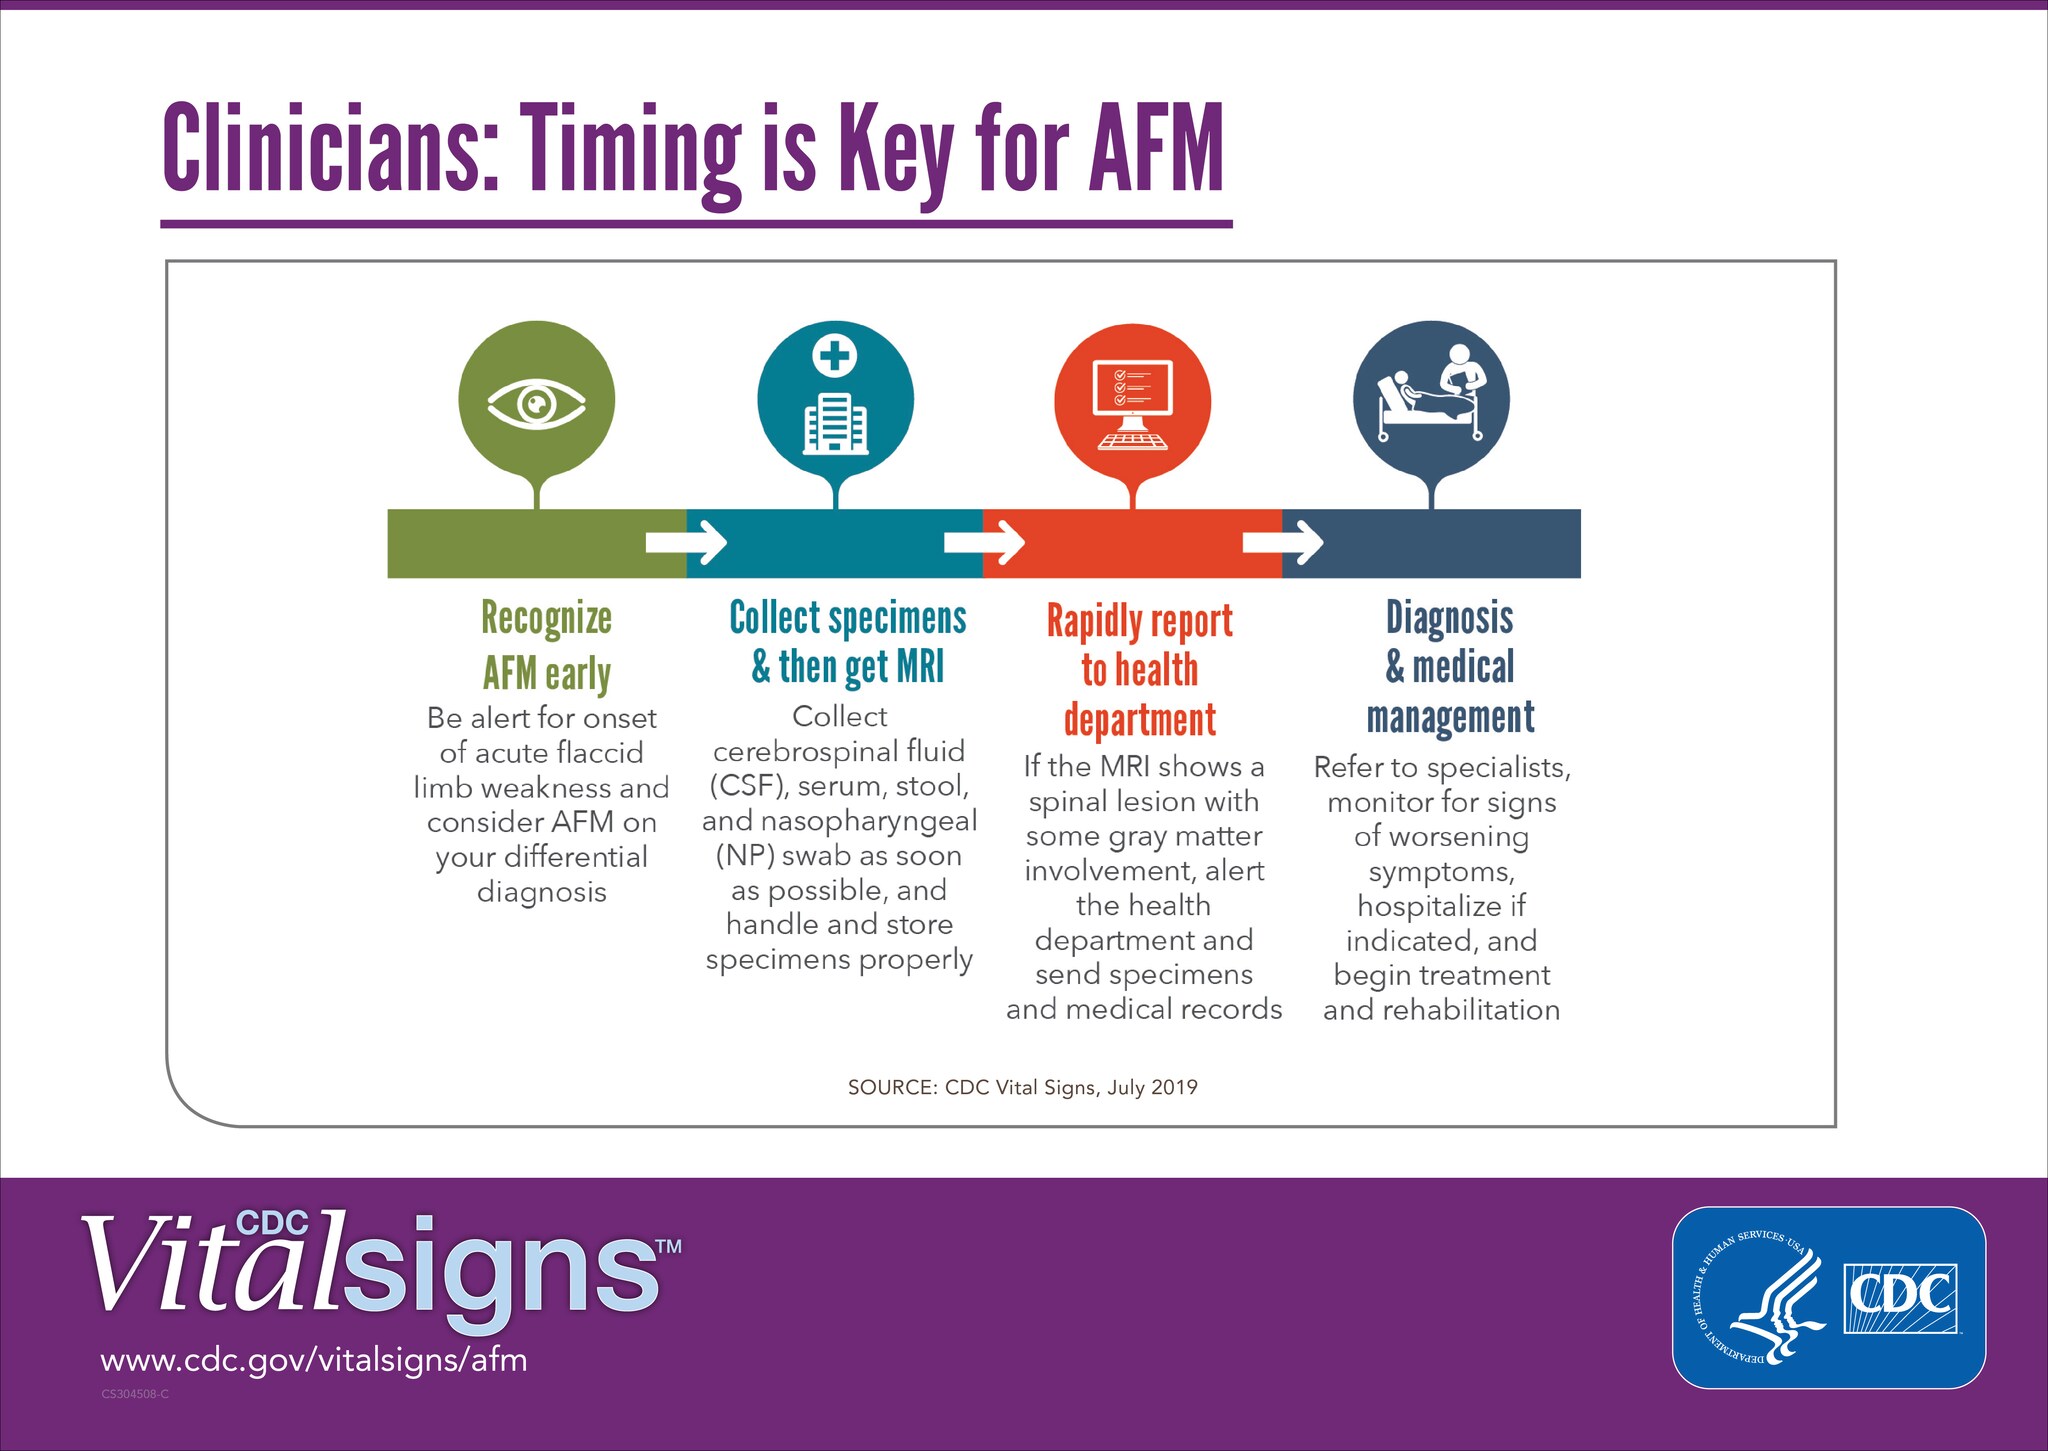 Clinicians: Timing is Key for AFM Infographic